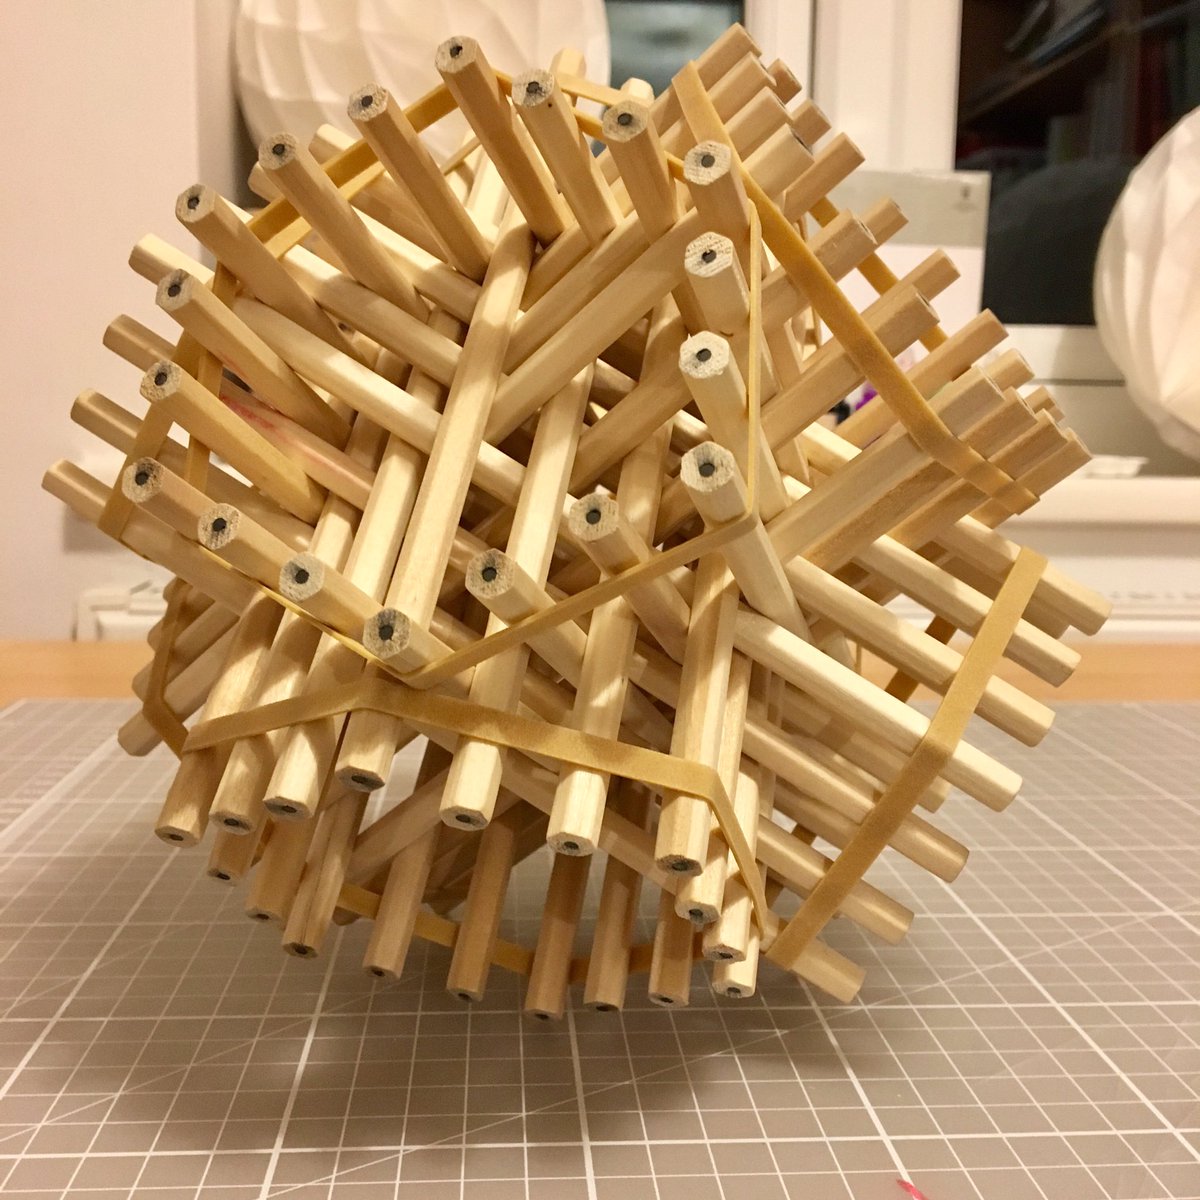 7) Paper not your thing? Pencils are? You’ll need a lot of them for the fantastically rewarding Hexastix!See my  #ArtfulMaths blog post here with excellent video instructions from  @standupmaths:  https://www.artfulmaths.com/blog/hexastix PS elastic bands disintegrate so best use string instead